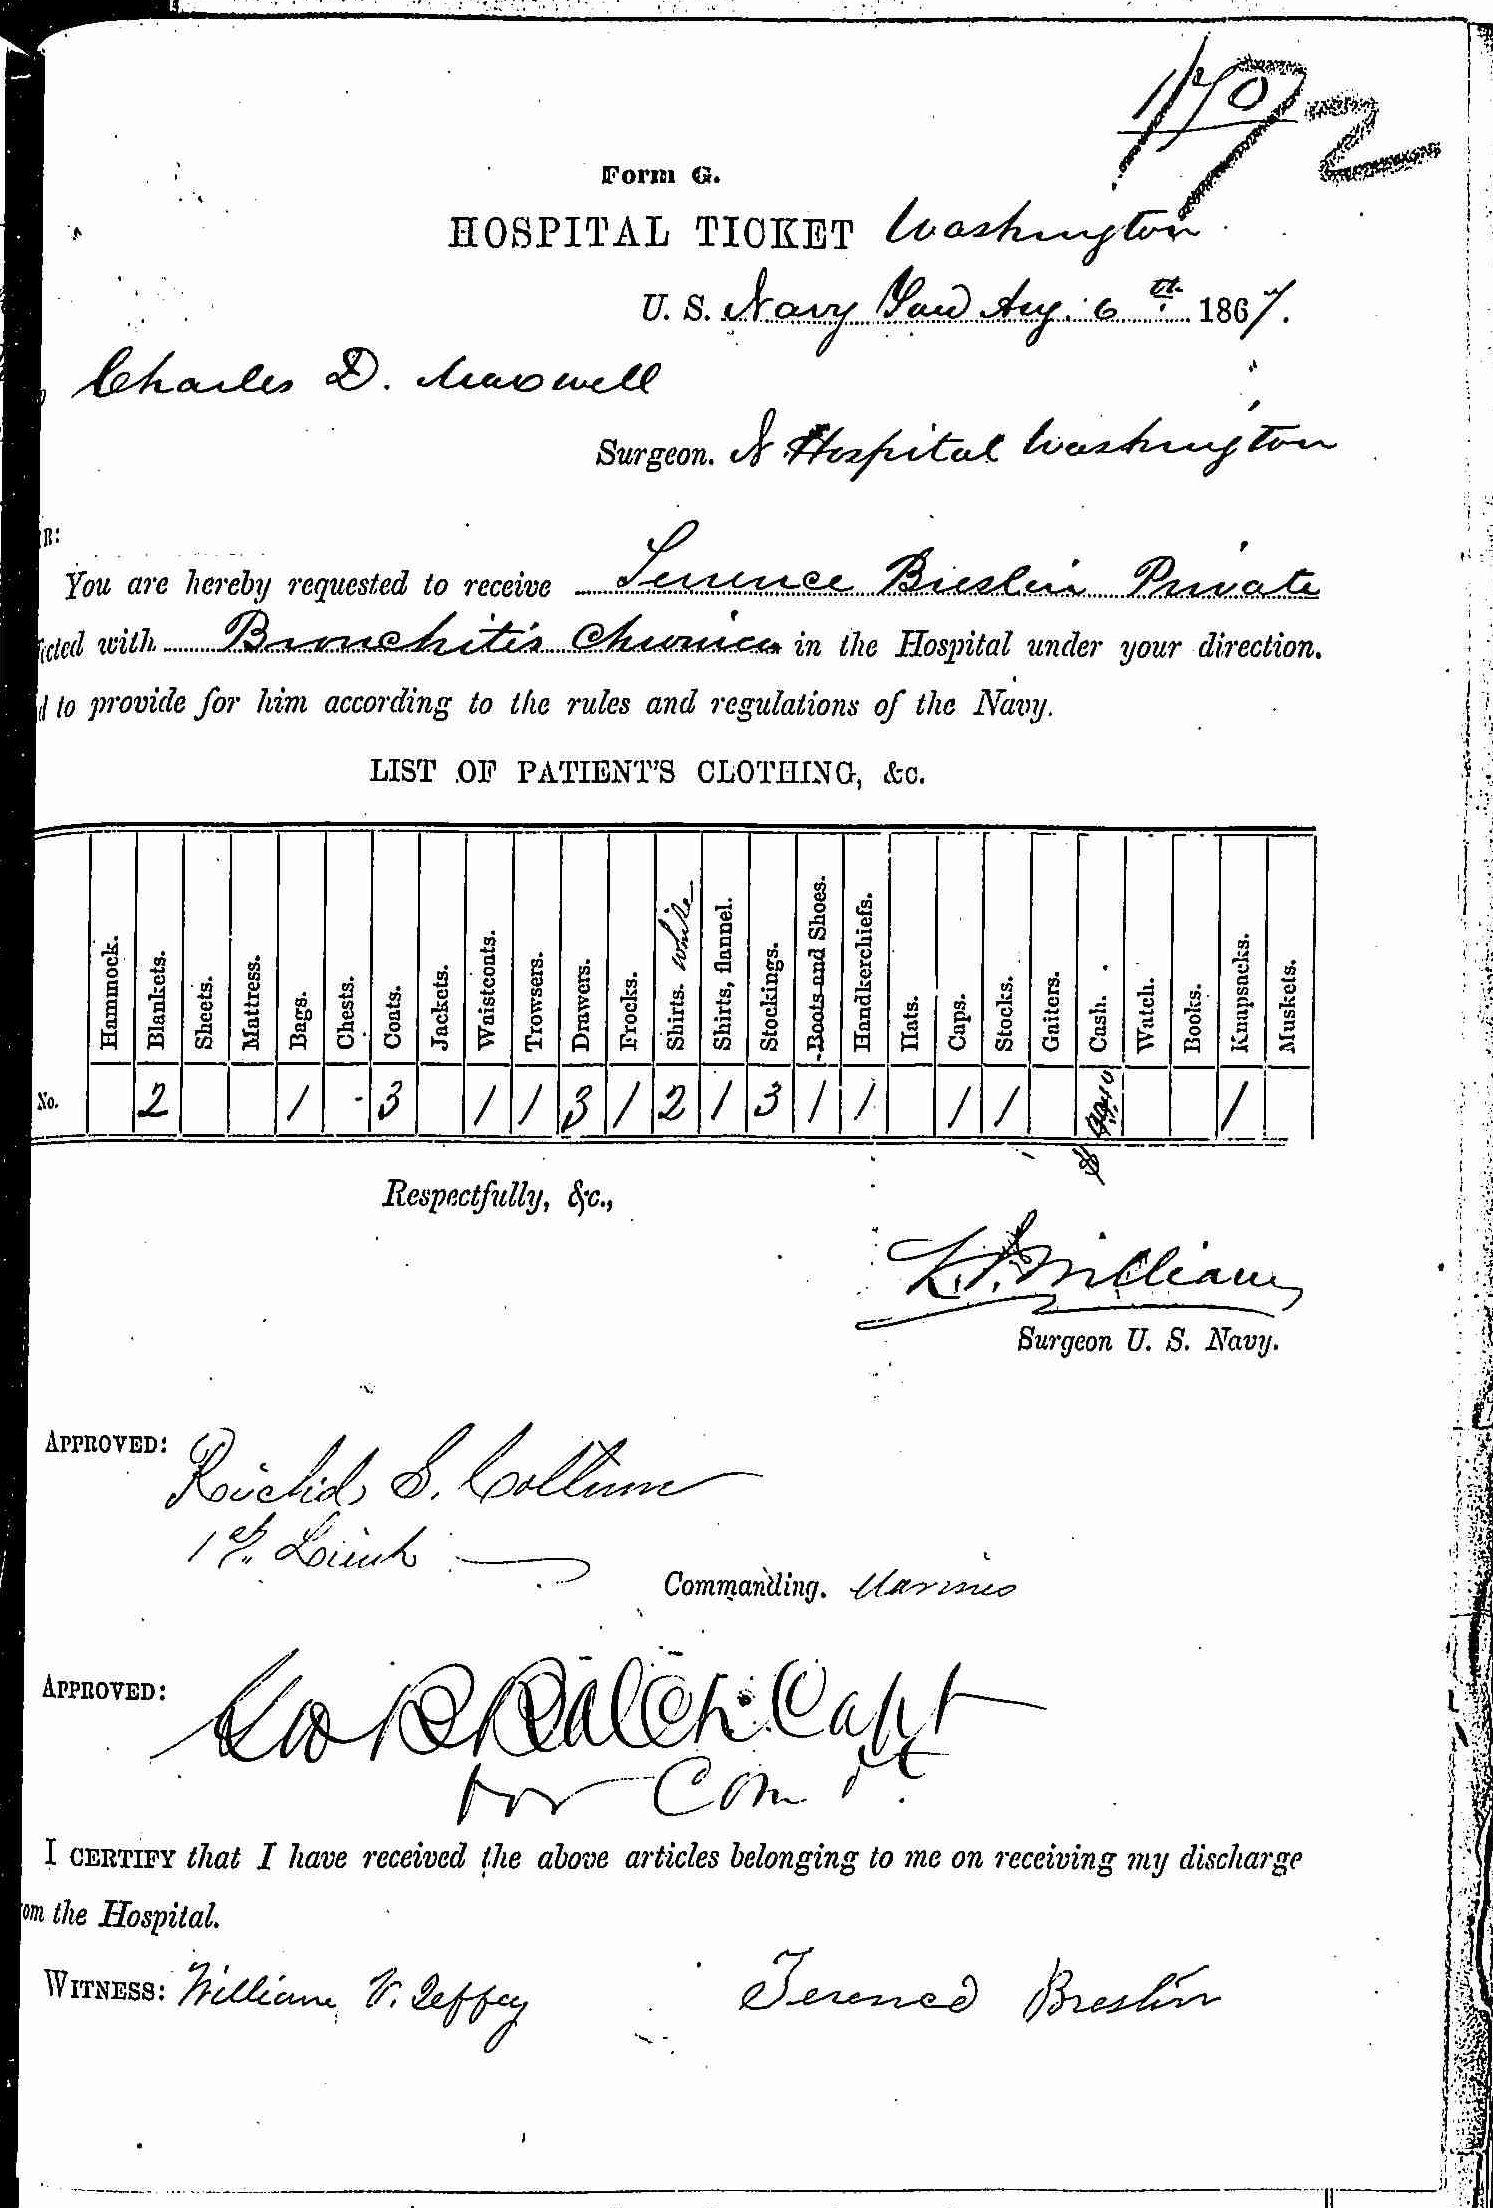 Entry for Terrence Breslin (second admission page 1 of 2) in the log Hospital Tickets and Case Papers - Naval Hospital - Washington, D.C. - 1866-68